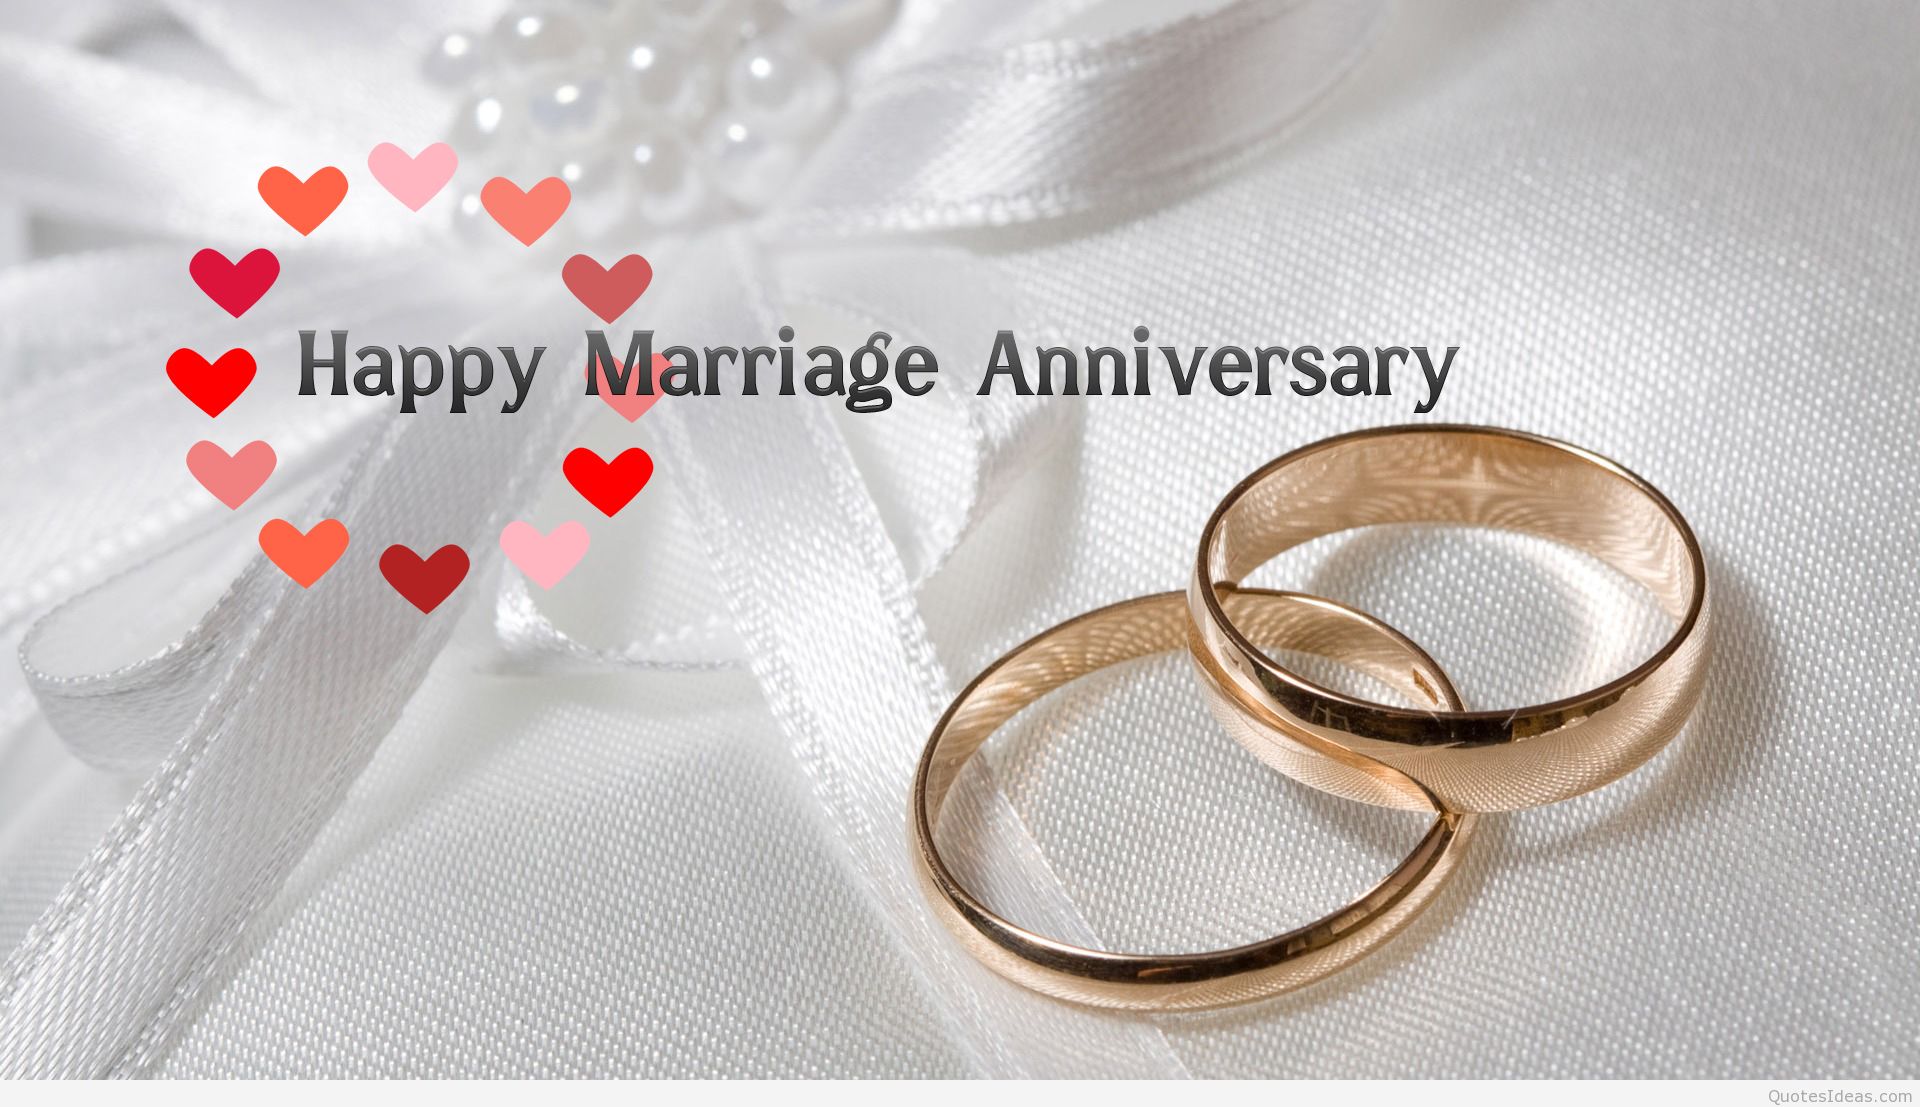 Happy 5rd Marriage Anniversary Card Wallpaper